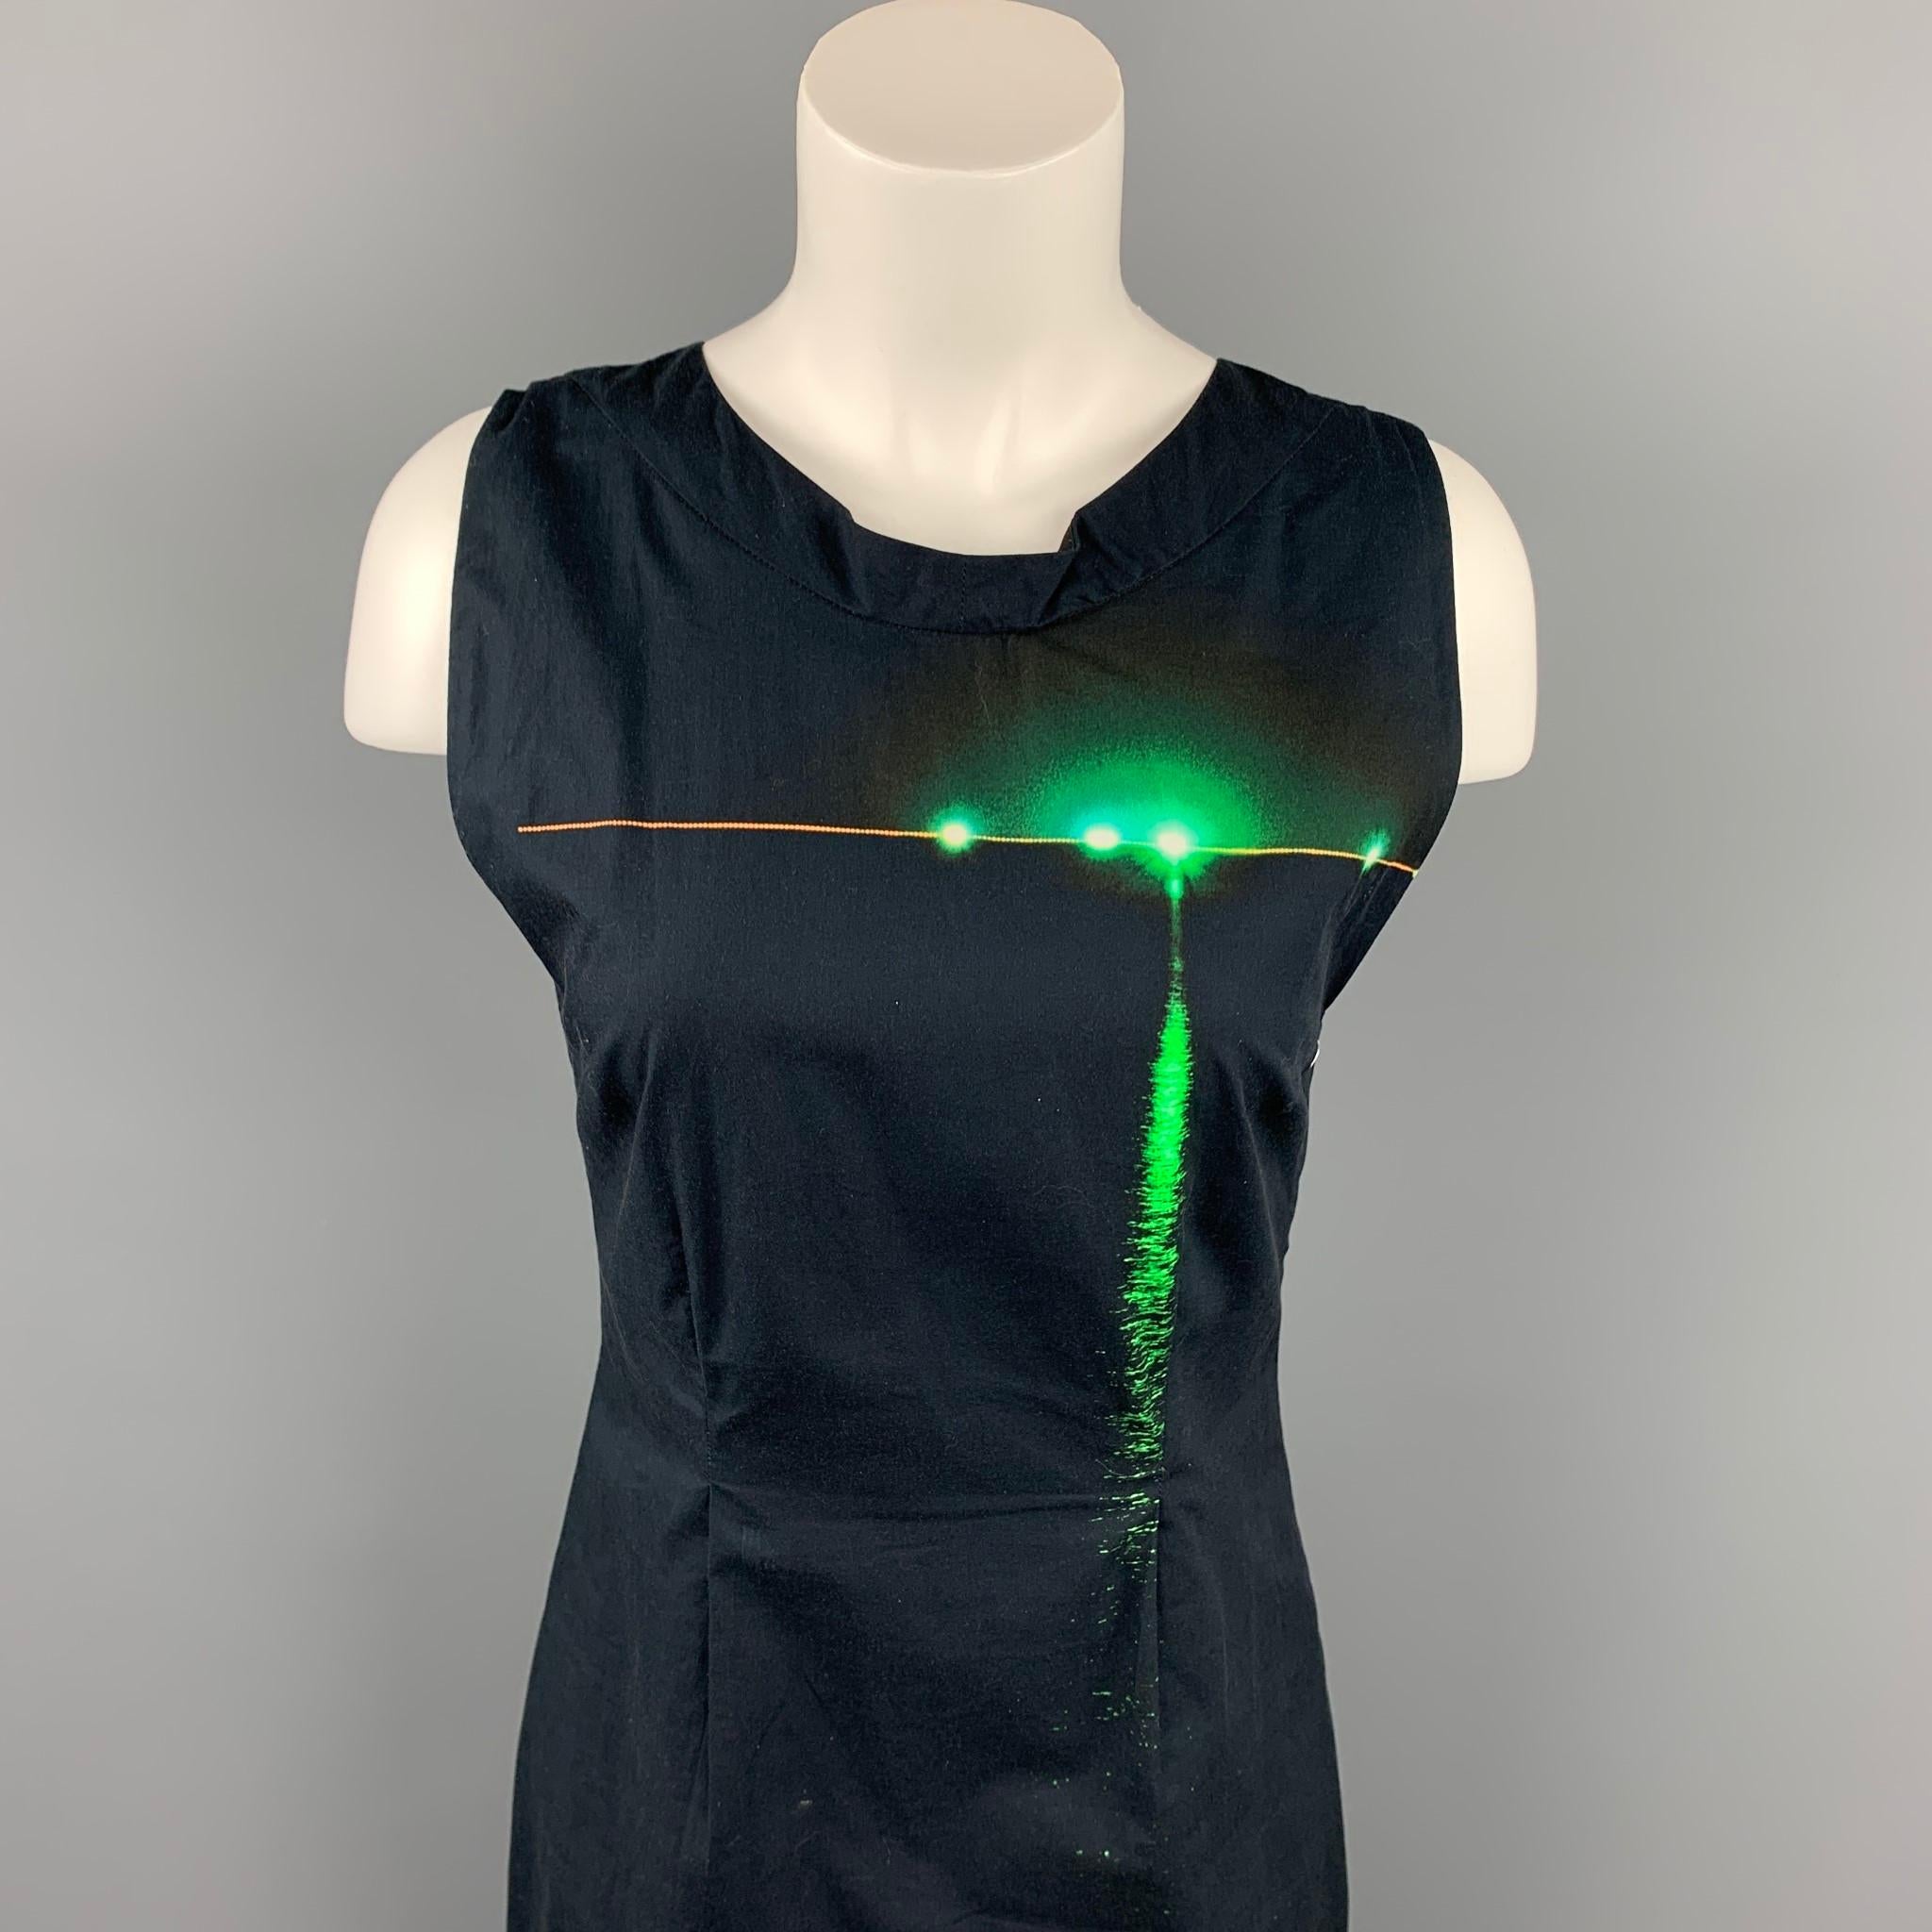 DRIES VAN NOTEN dress comes in a black & green poplin cotton featuring a shift style, sleeveless, and a back zip up closure. Made in Belgium.

Very Good Pre-Owned Condition.
Marked: 36

Measurements:

Bust: 30 in.
Waist: 29 in.
Hip: 36 in.
Length: